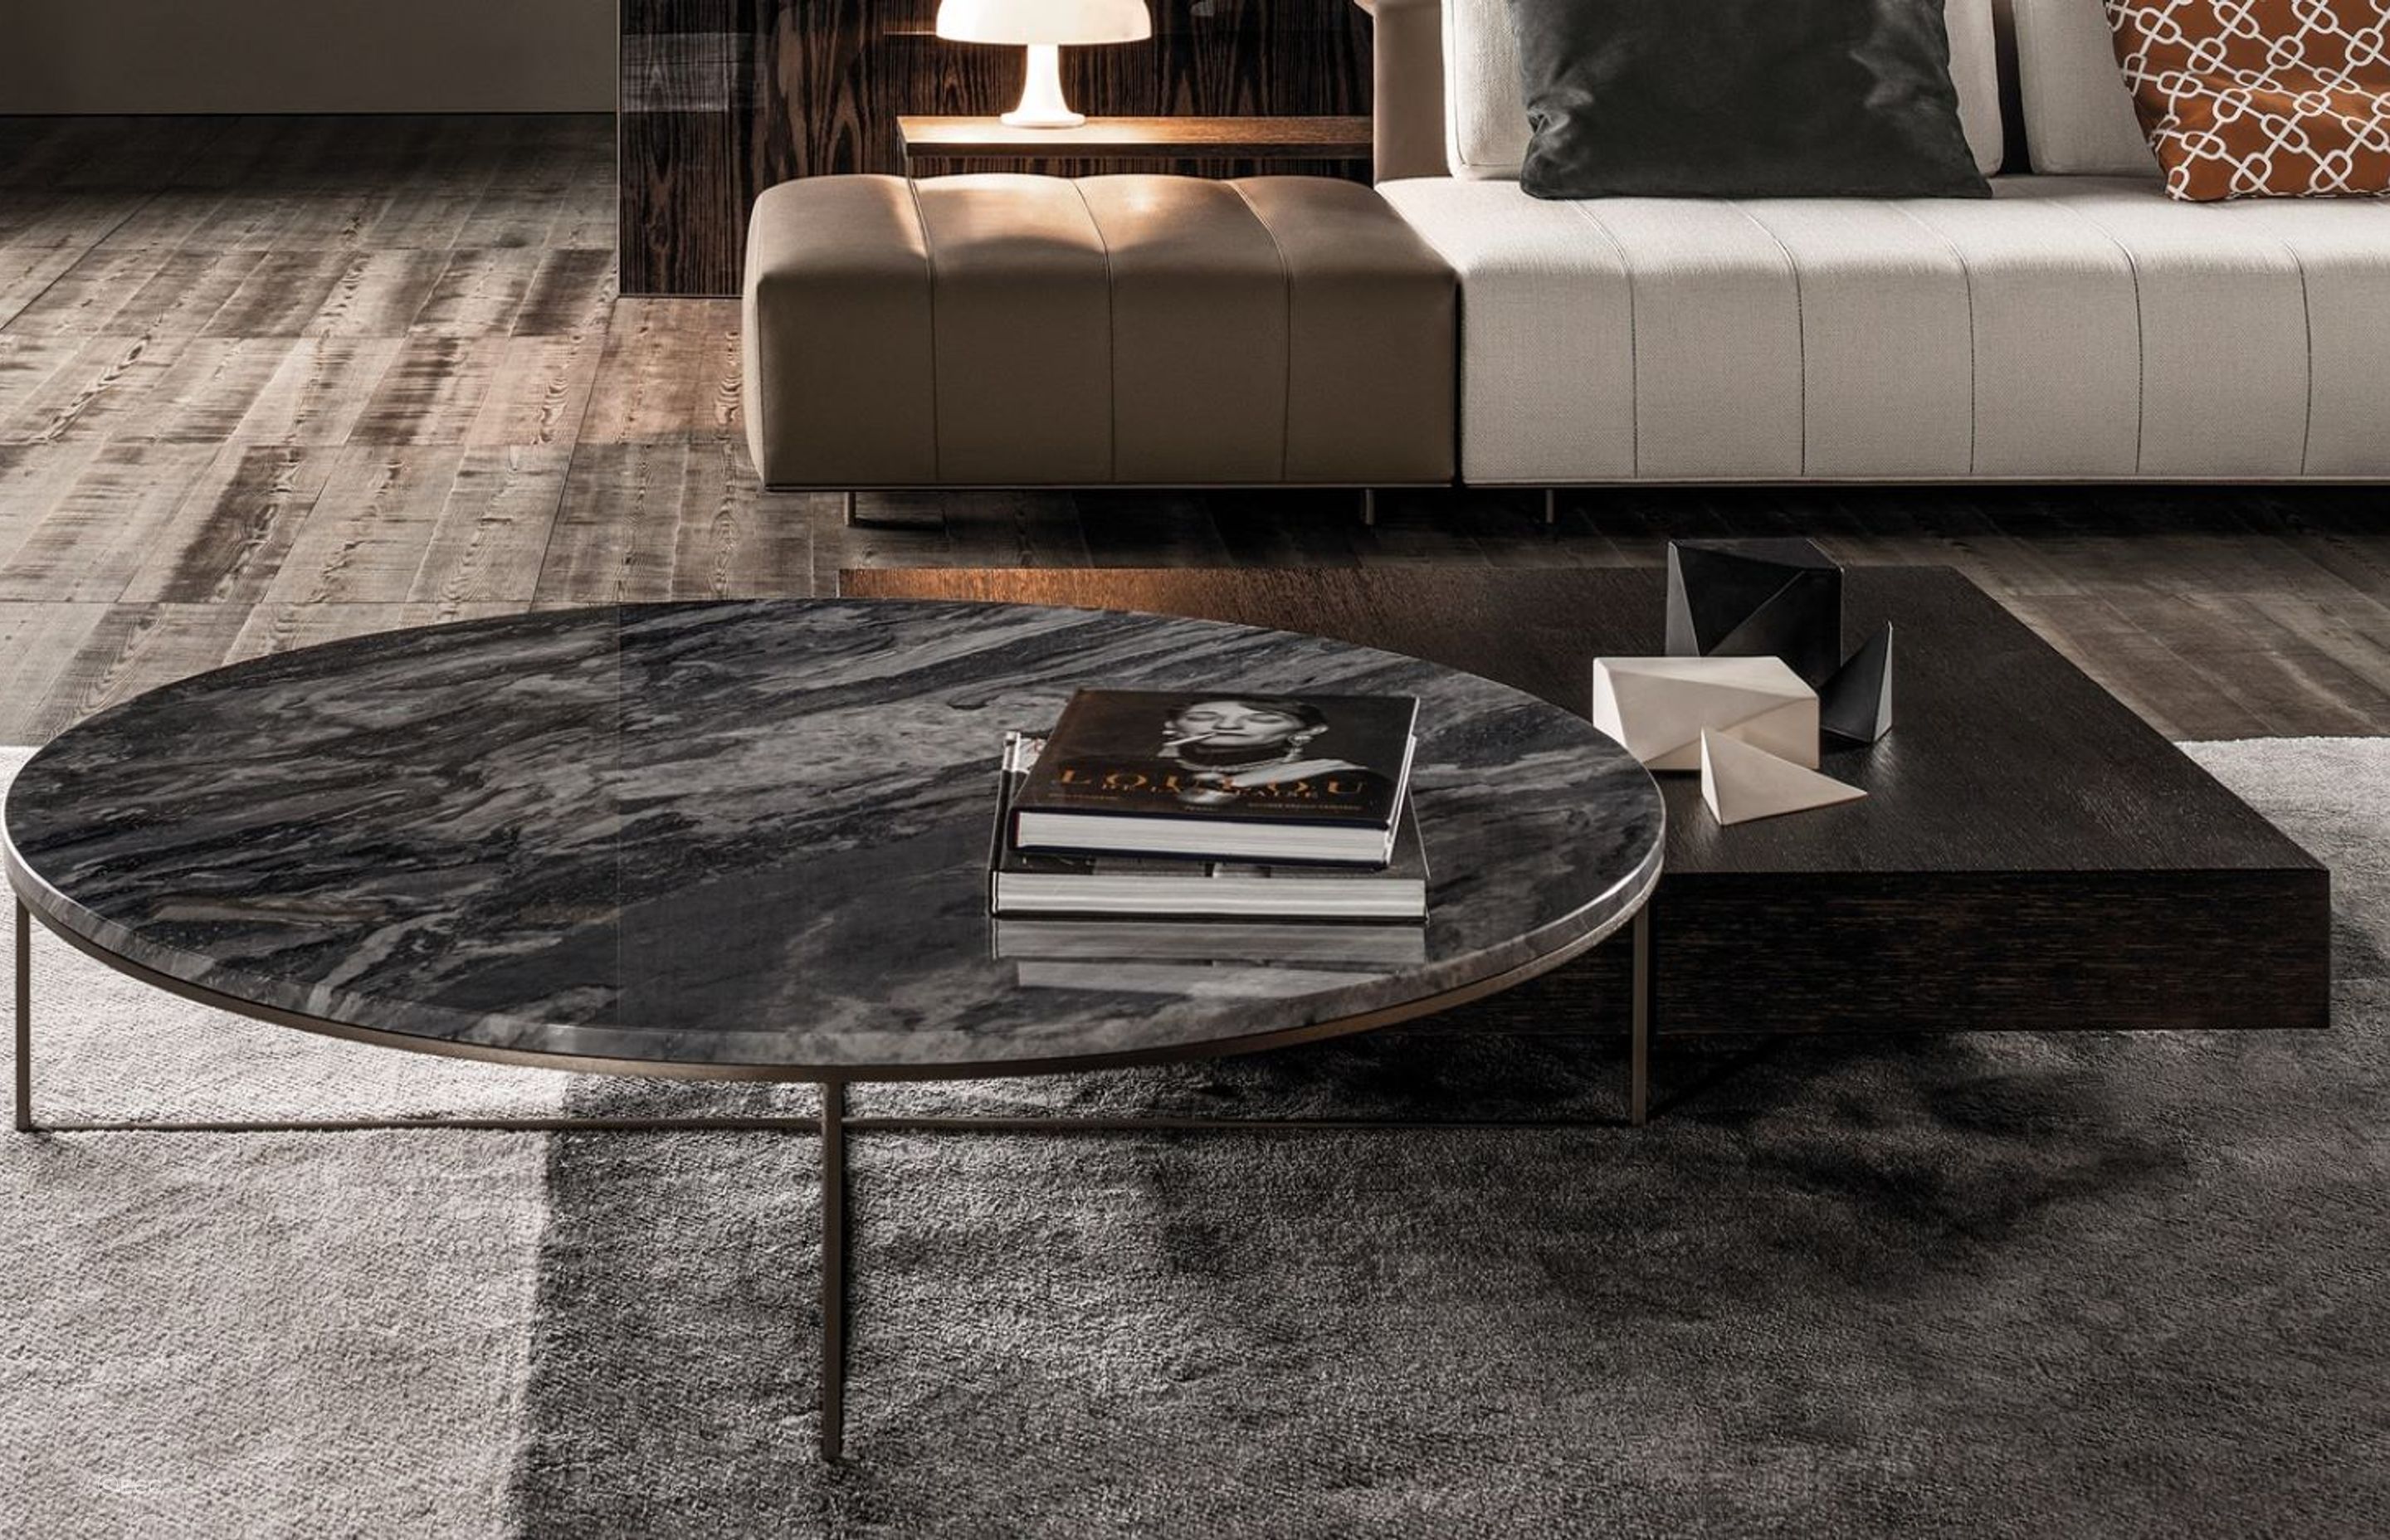 The sublime marble finish of this Calder Bronze Coffee Table by Minotti creates a striking contrast with the soft floor rug beneath it.